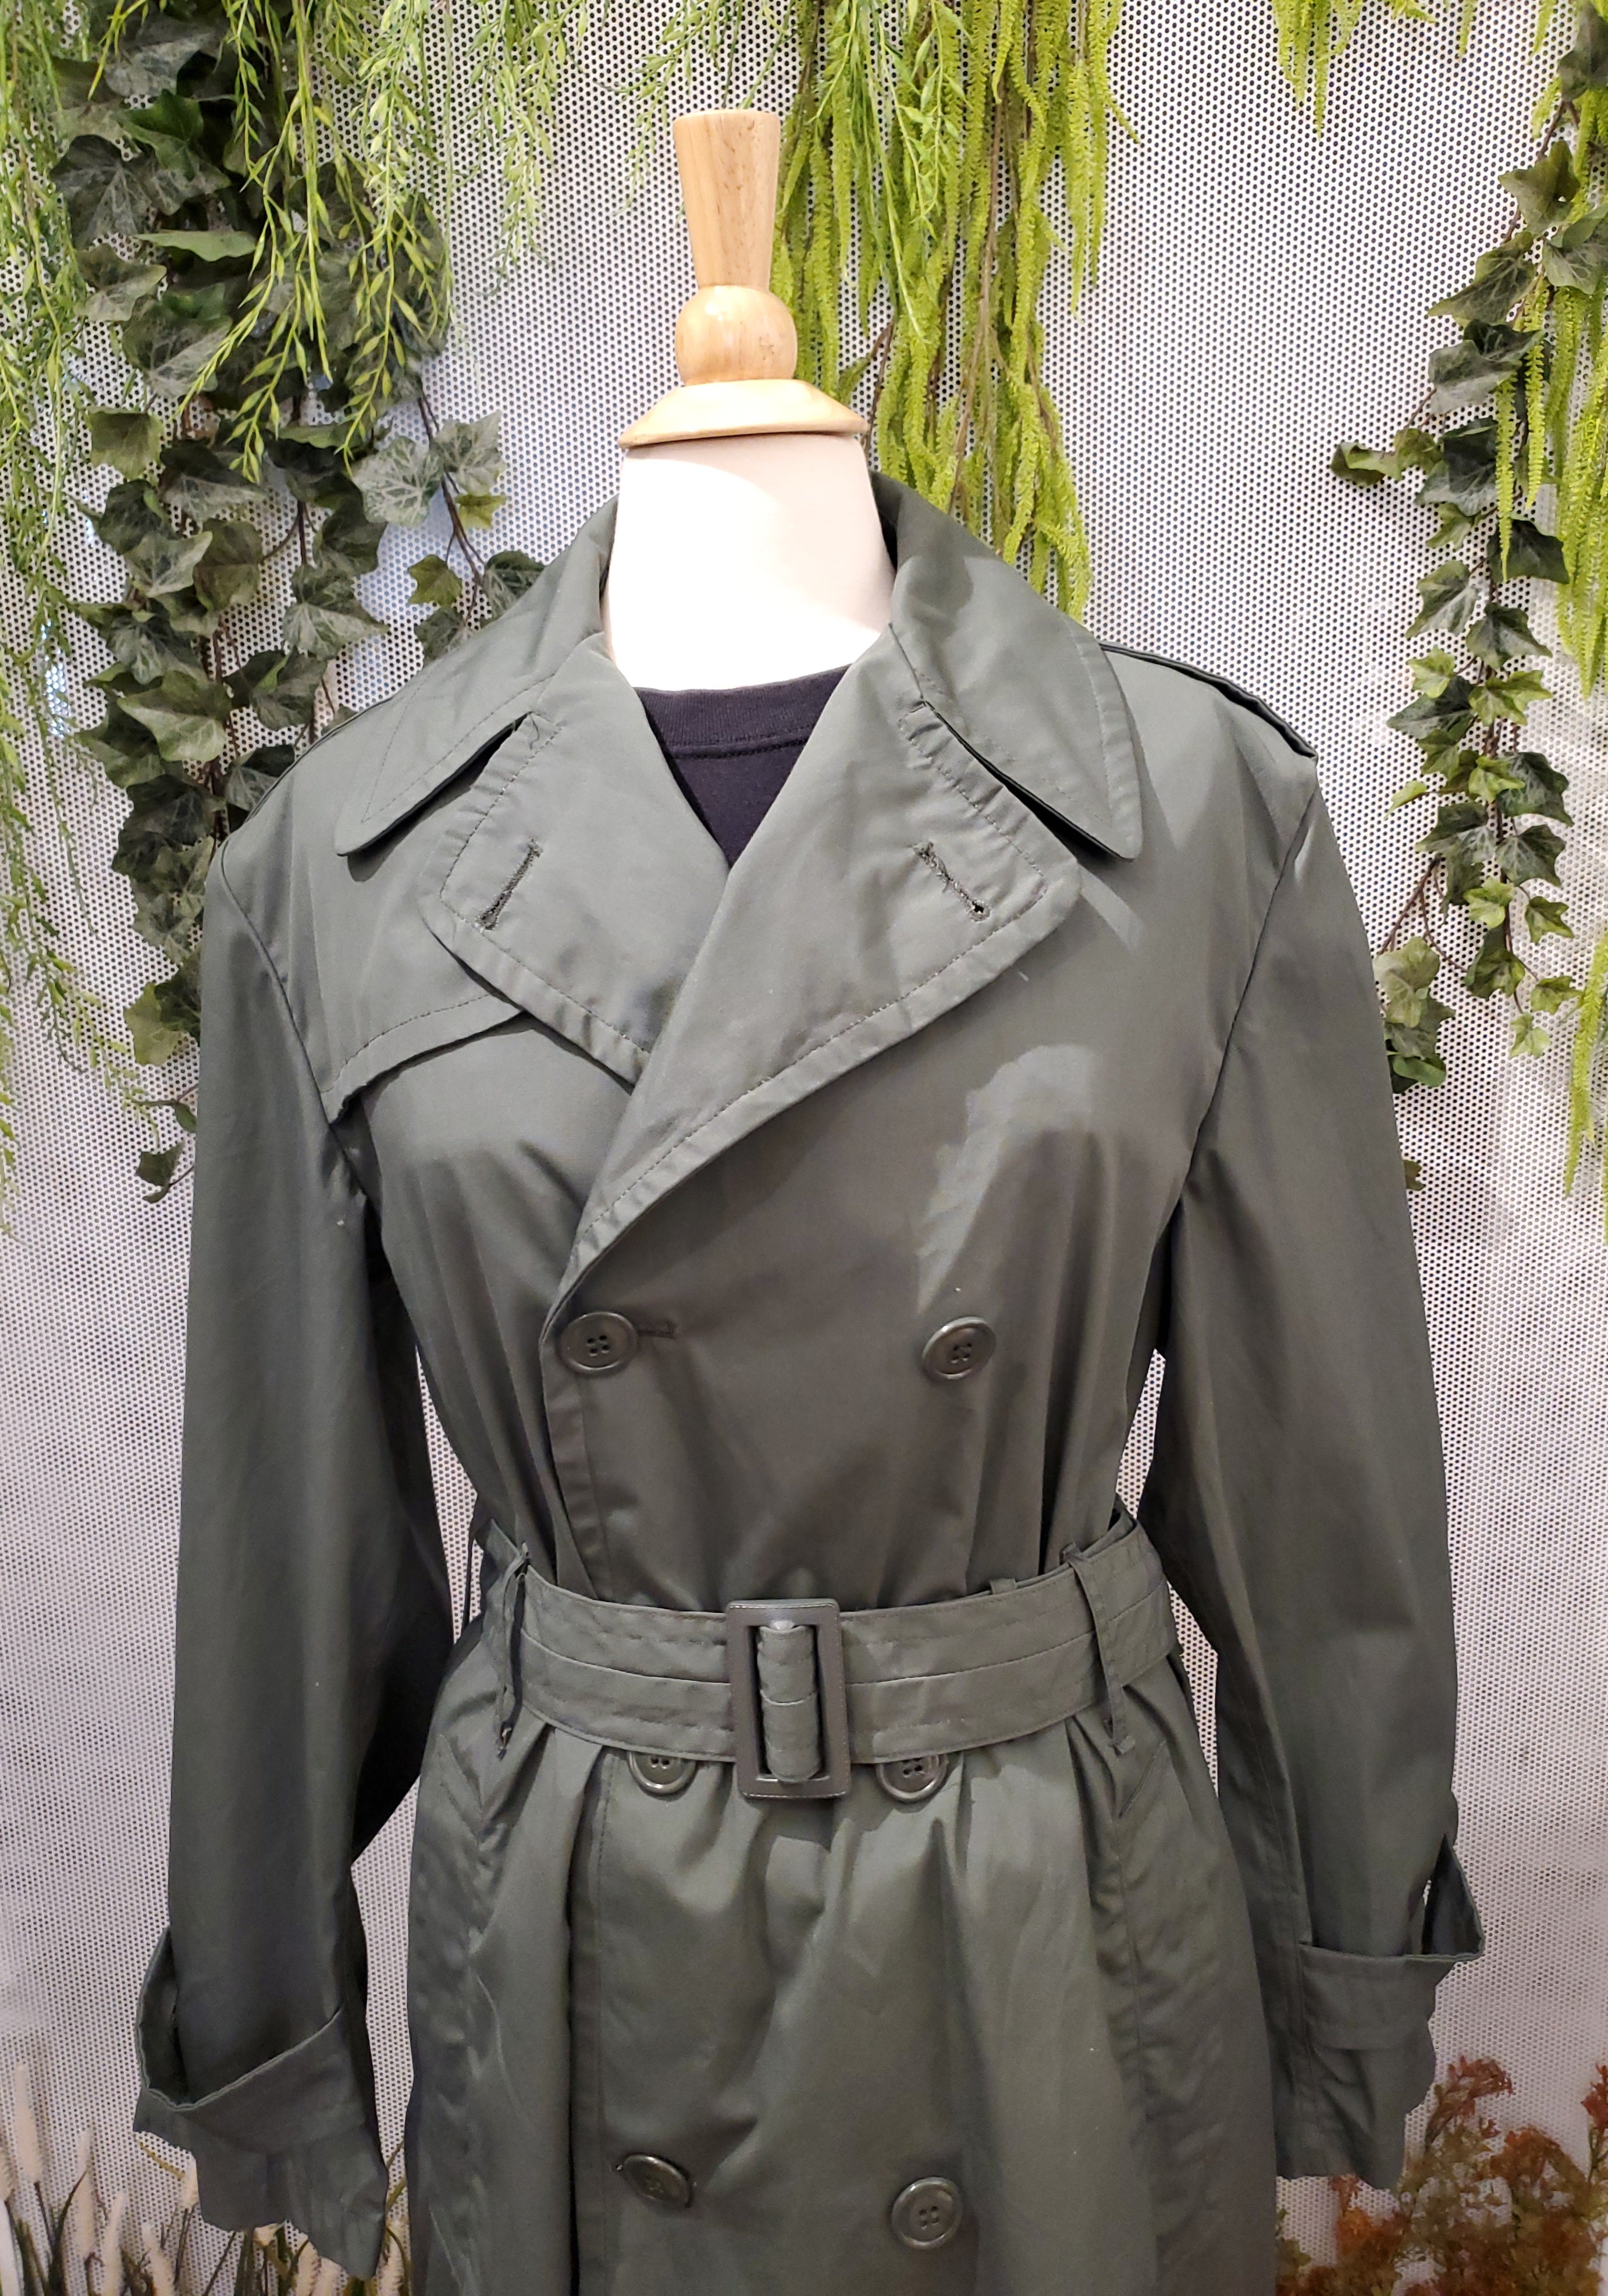 1970’s Military Trench Coat